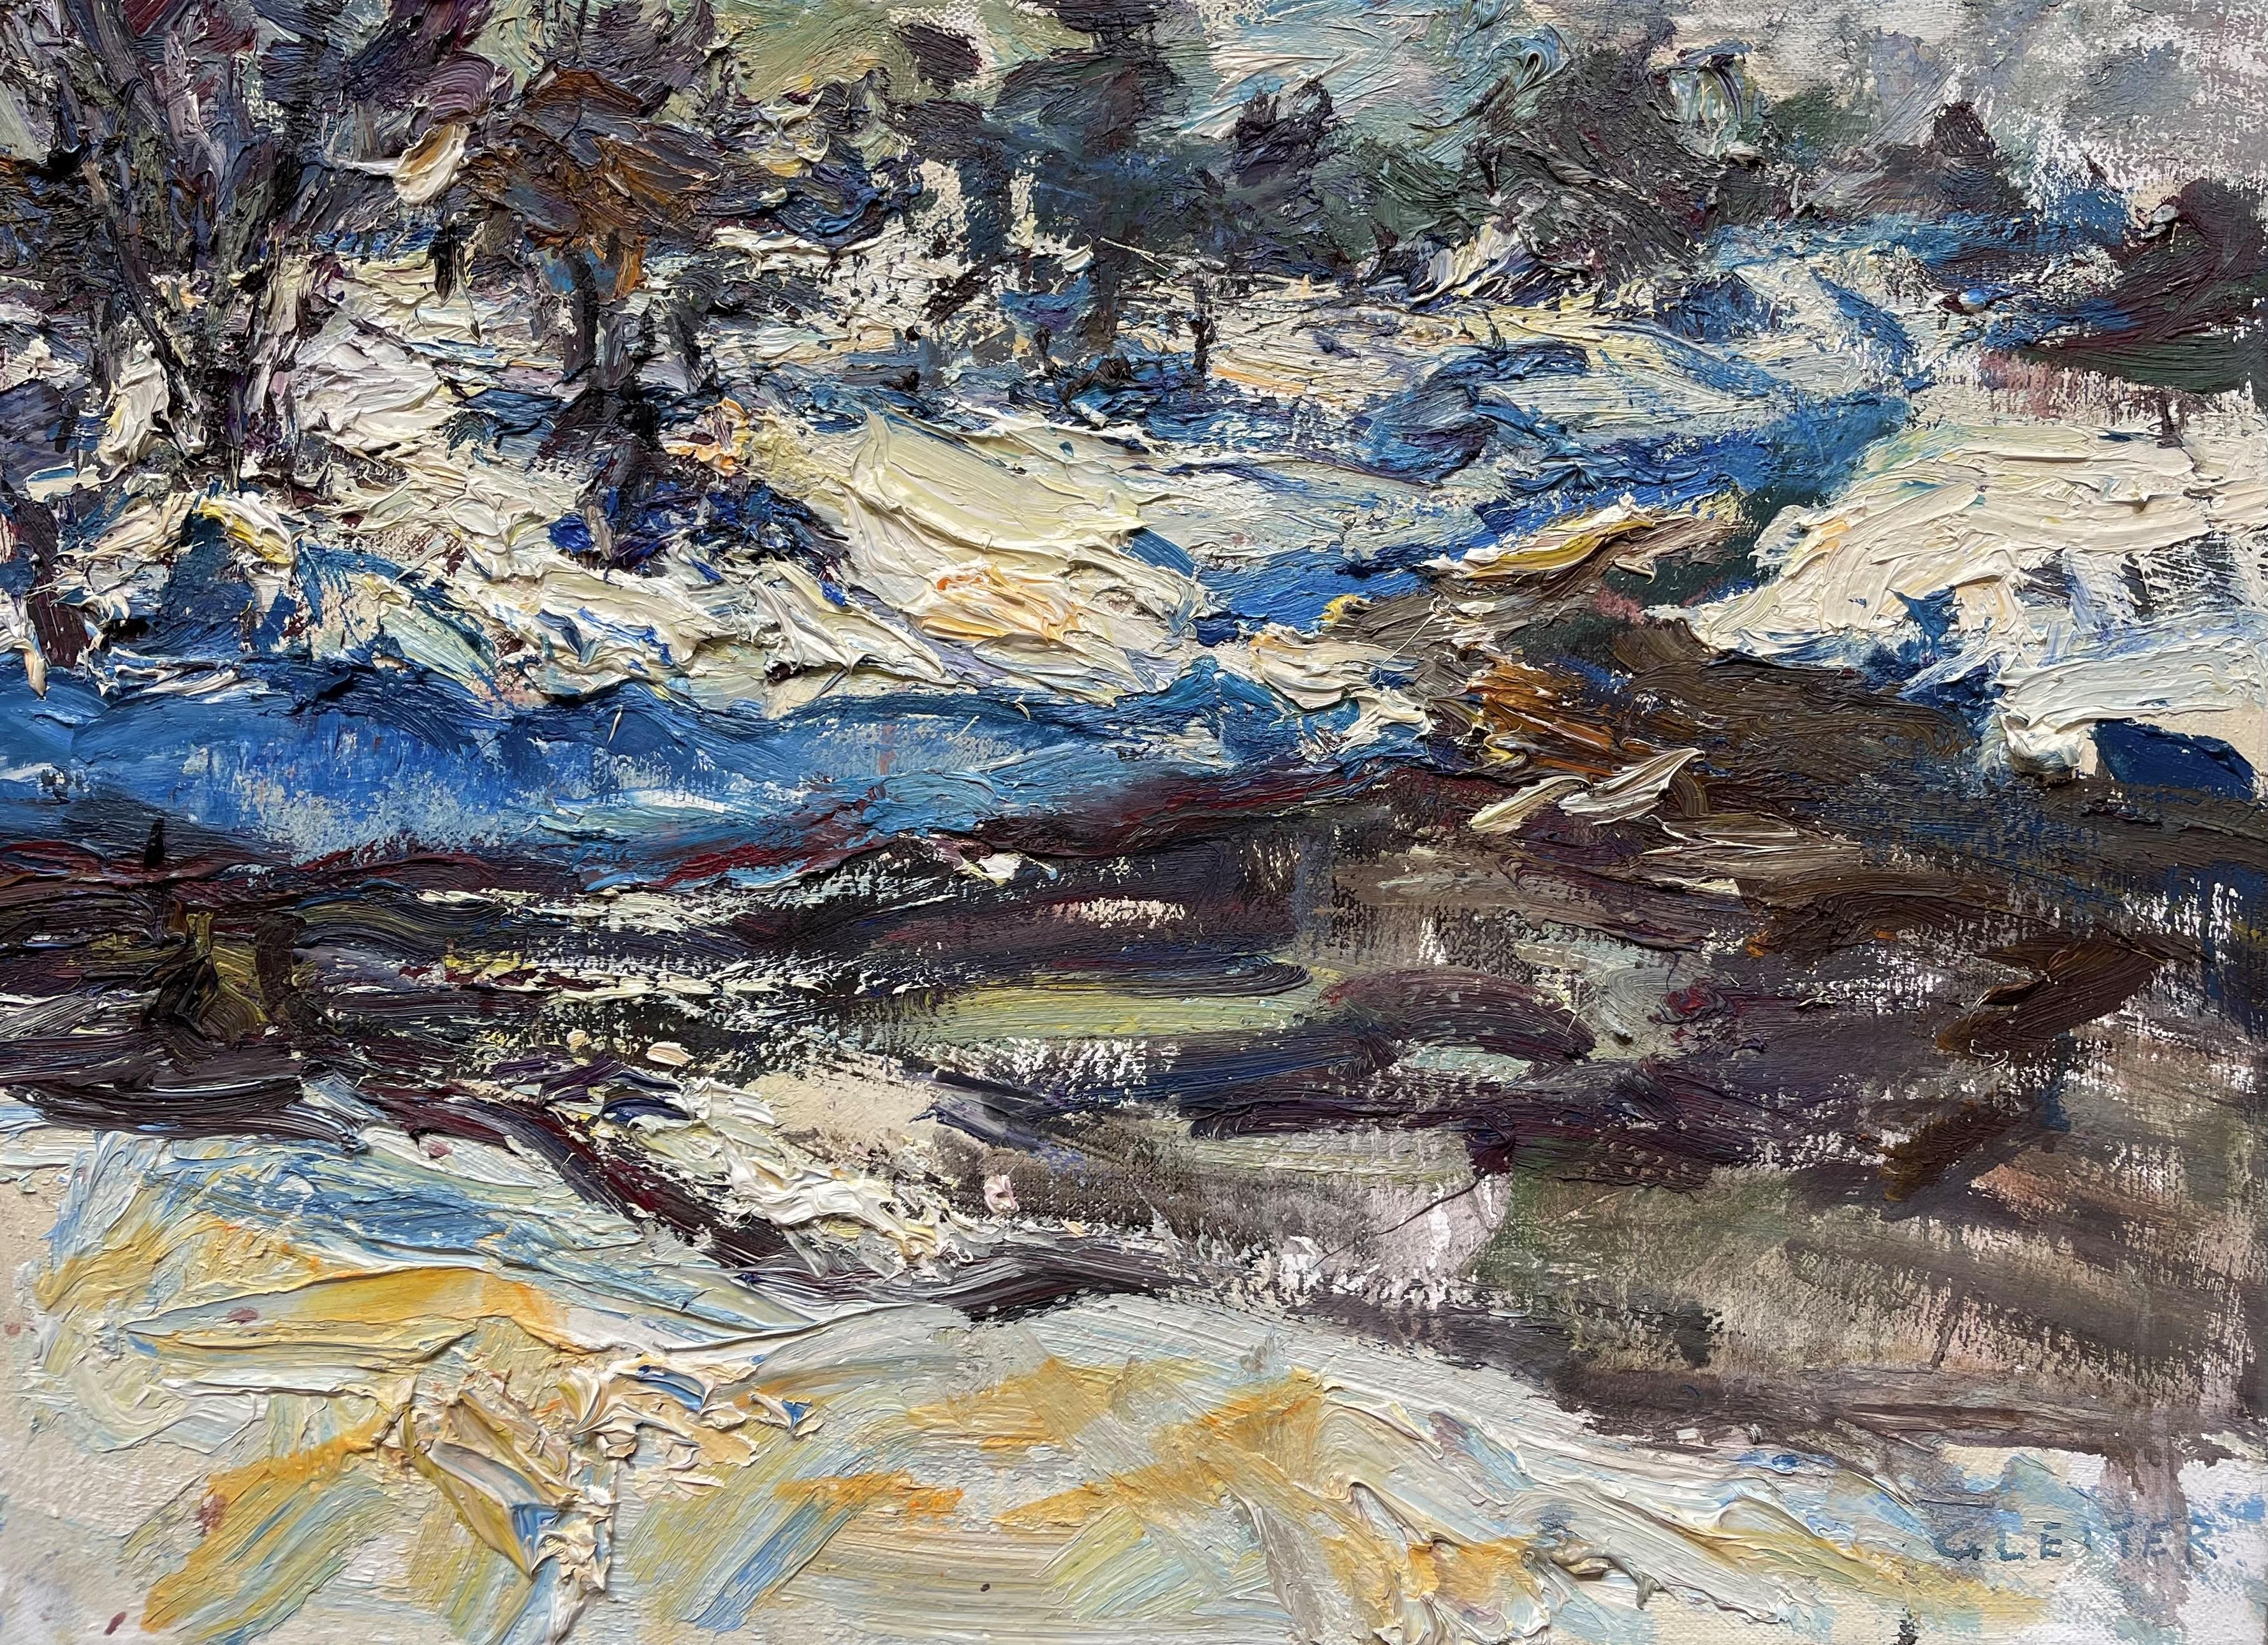 Ulrich Gleiter Landscape Painting - "Melting Snow Swedish Lapland" Oil Painting